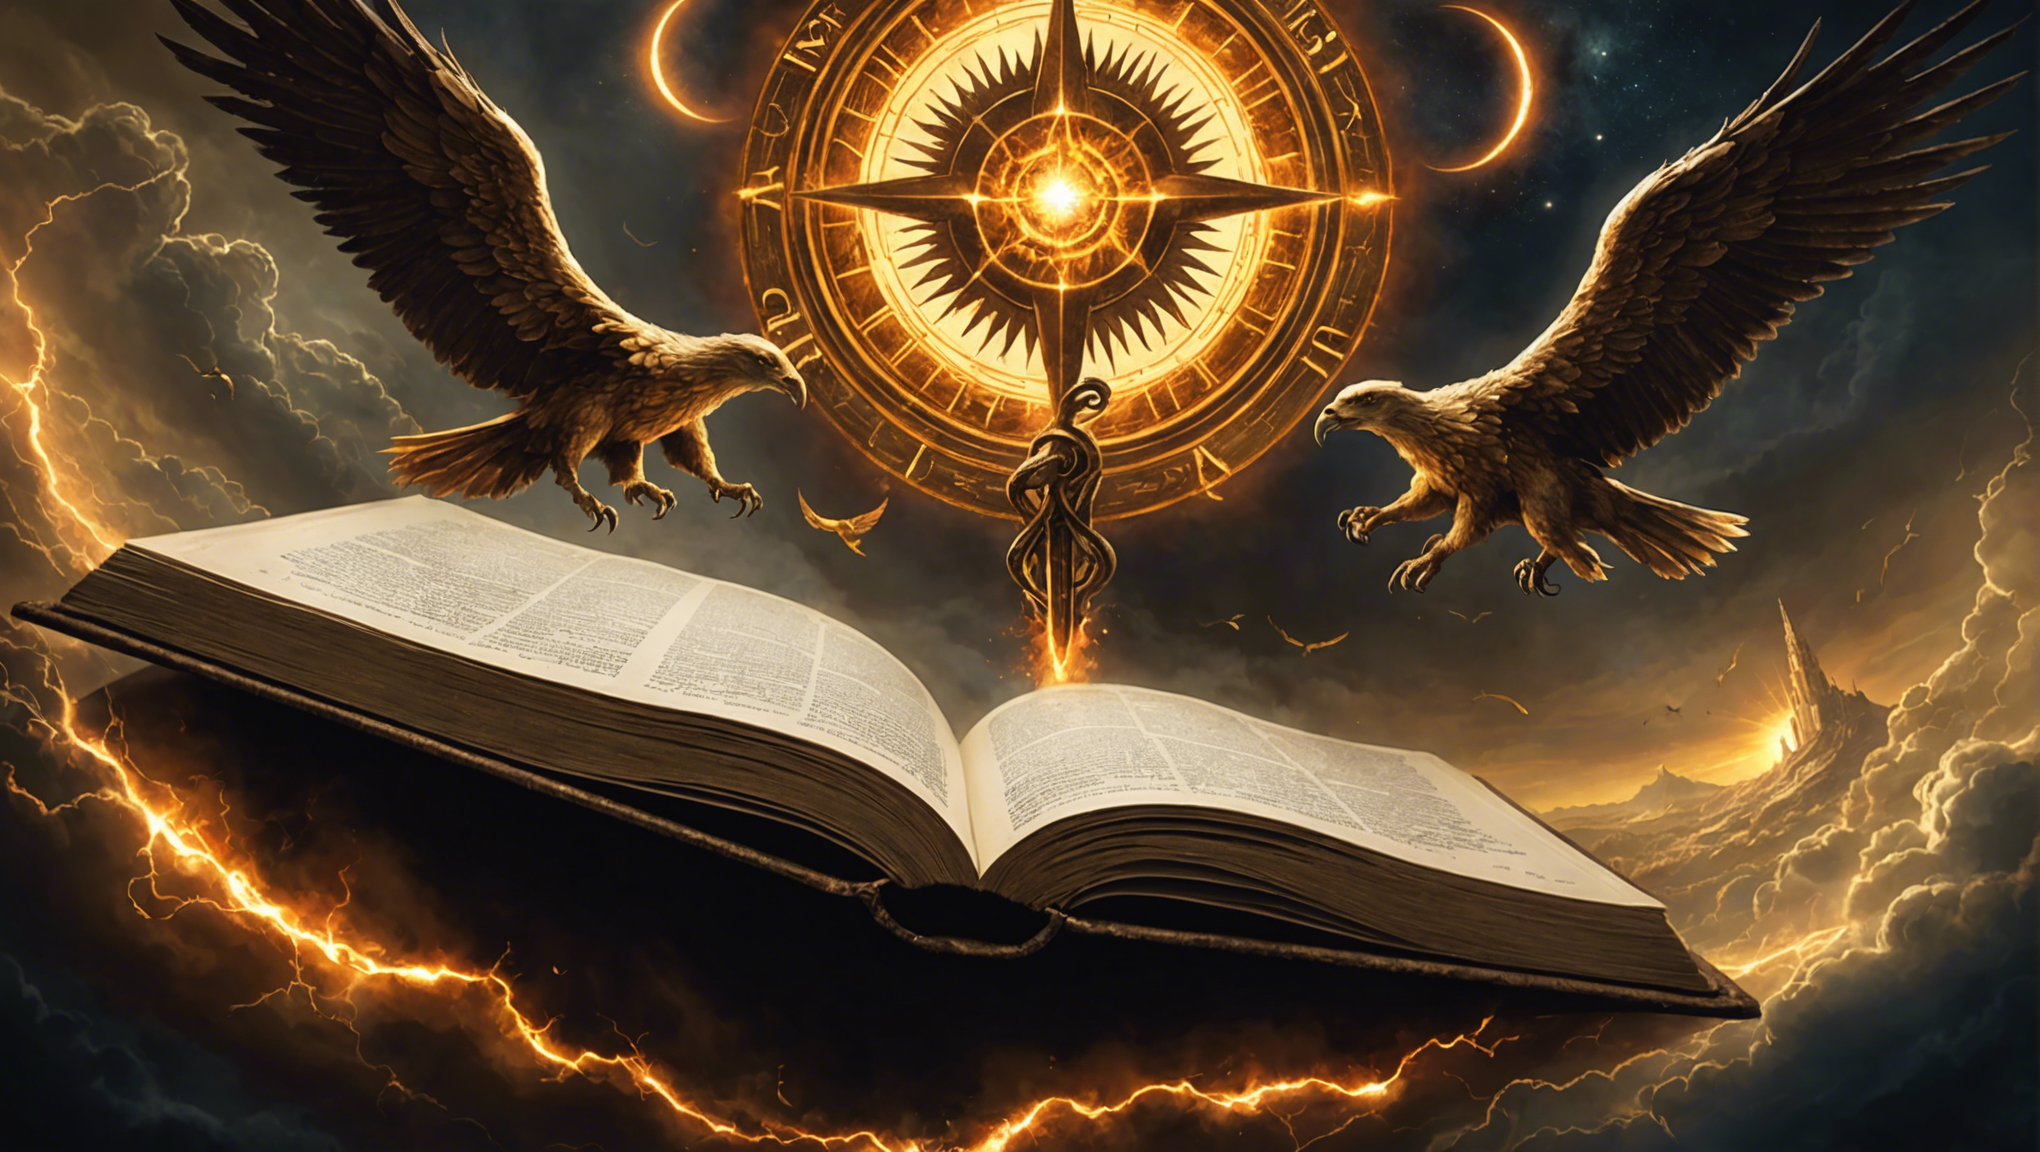 discover the significance of the symbols in the book of revelation and their meaning. explore and uncover the hidden messages behind the enigmatic symbols in this fascinating book.